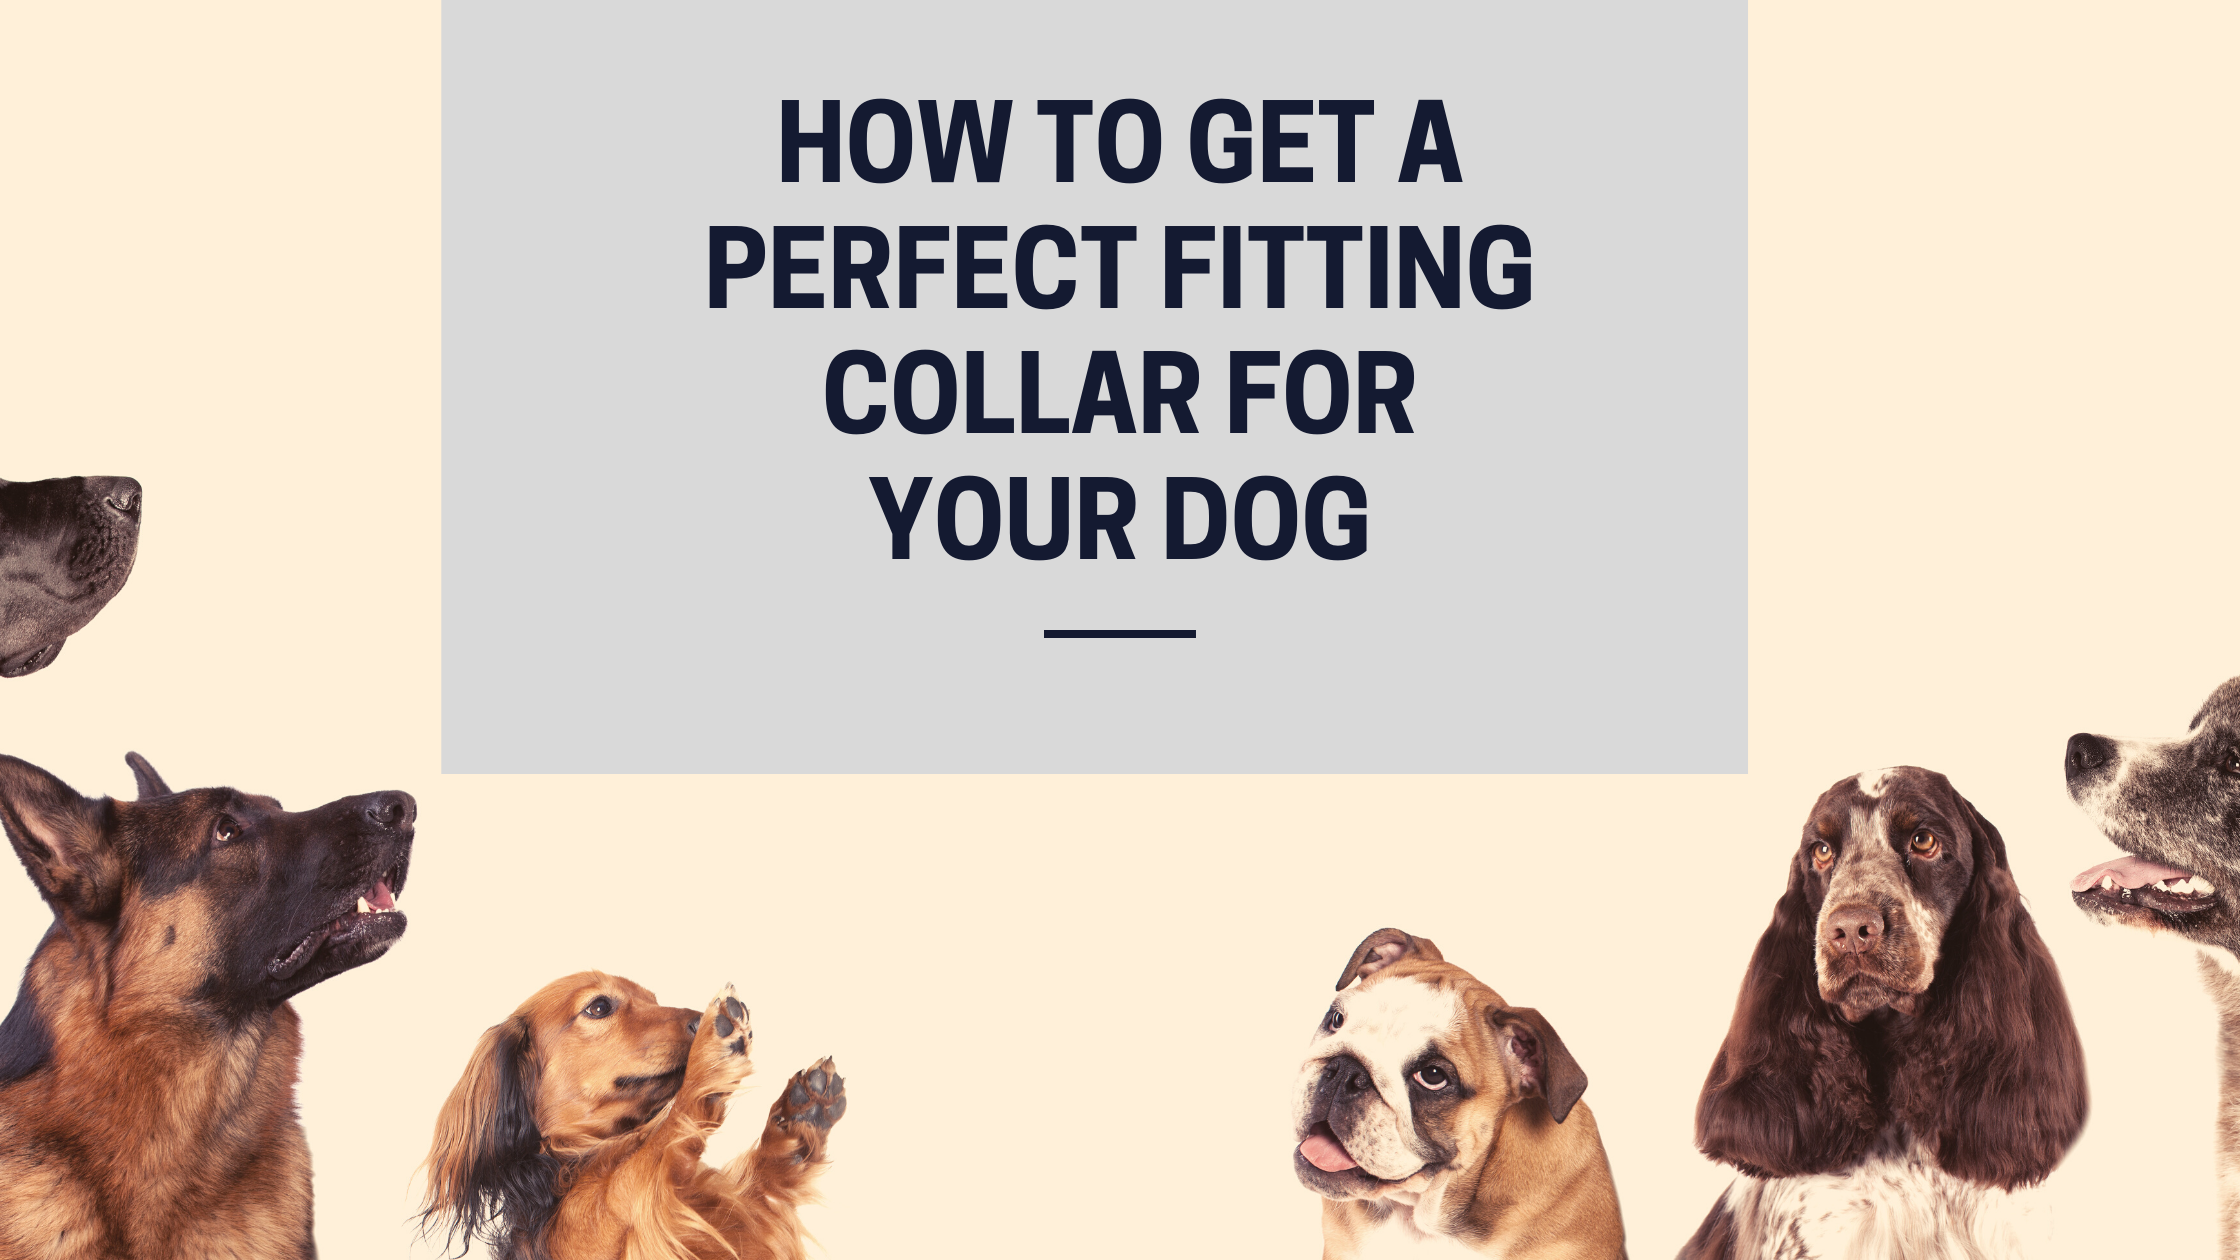 How Tight Should a Dog Collar Be?